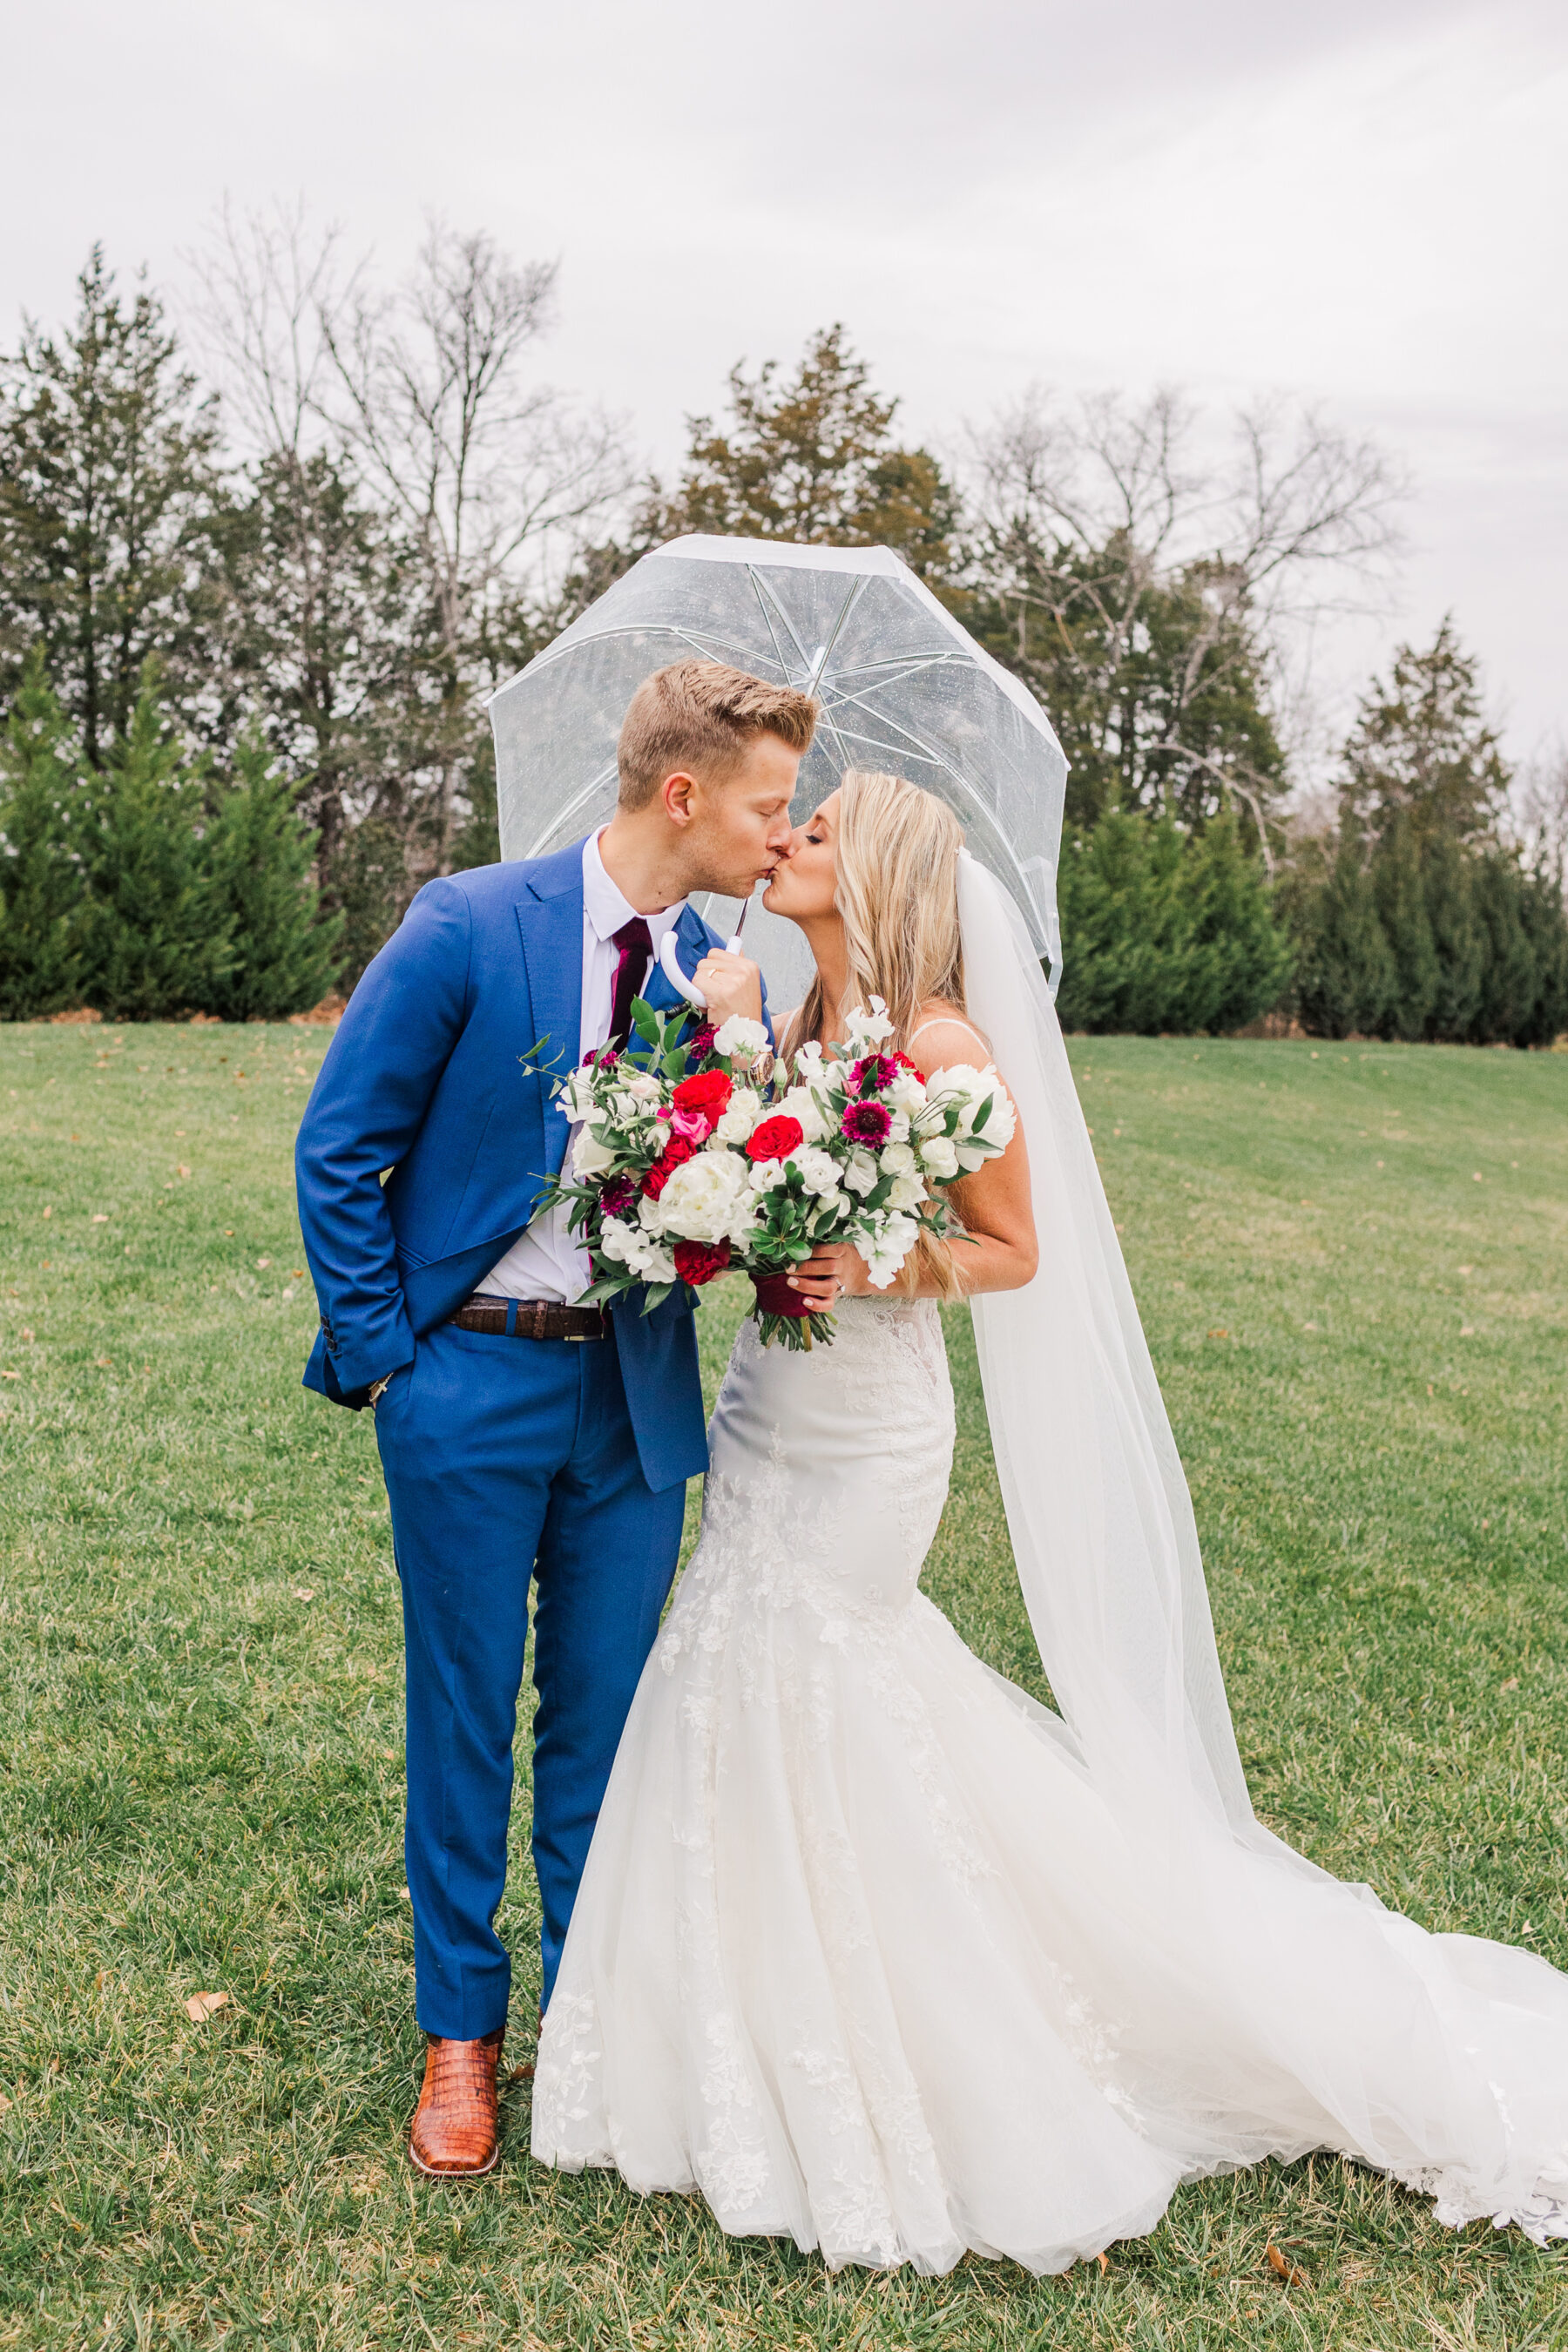 Rainy wedding day photography by Amy Allmand | Nashville Bride Guide